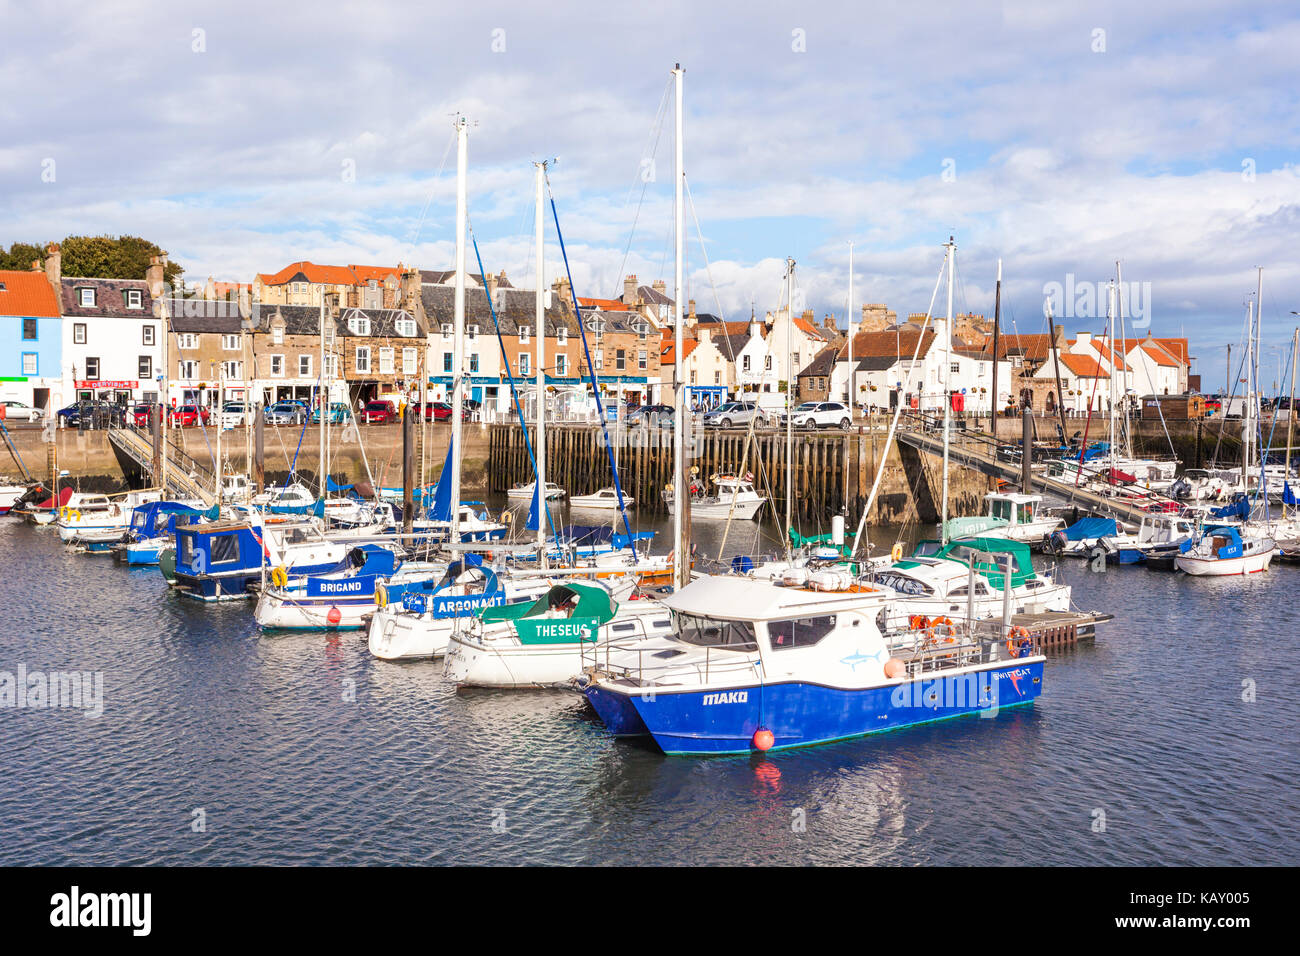 Boats and yachts in the harbour in the fishing village of Anstruther, Fife, Scotland UK Stock Photo